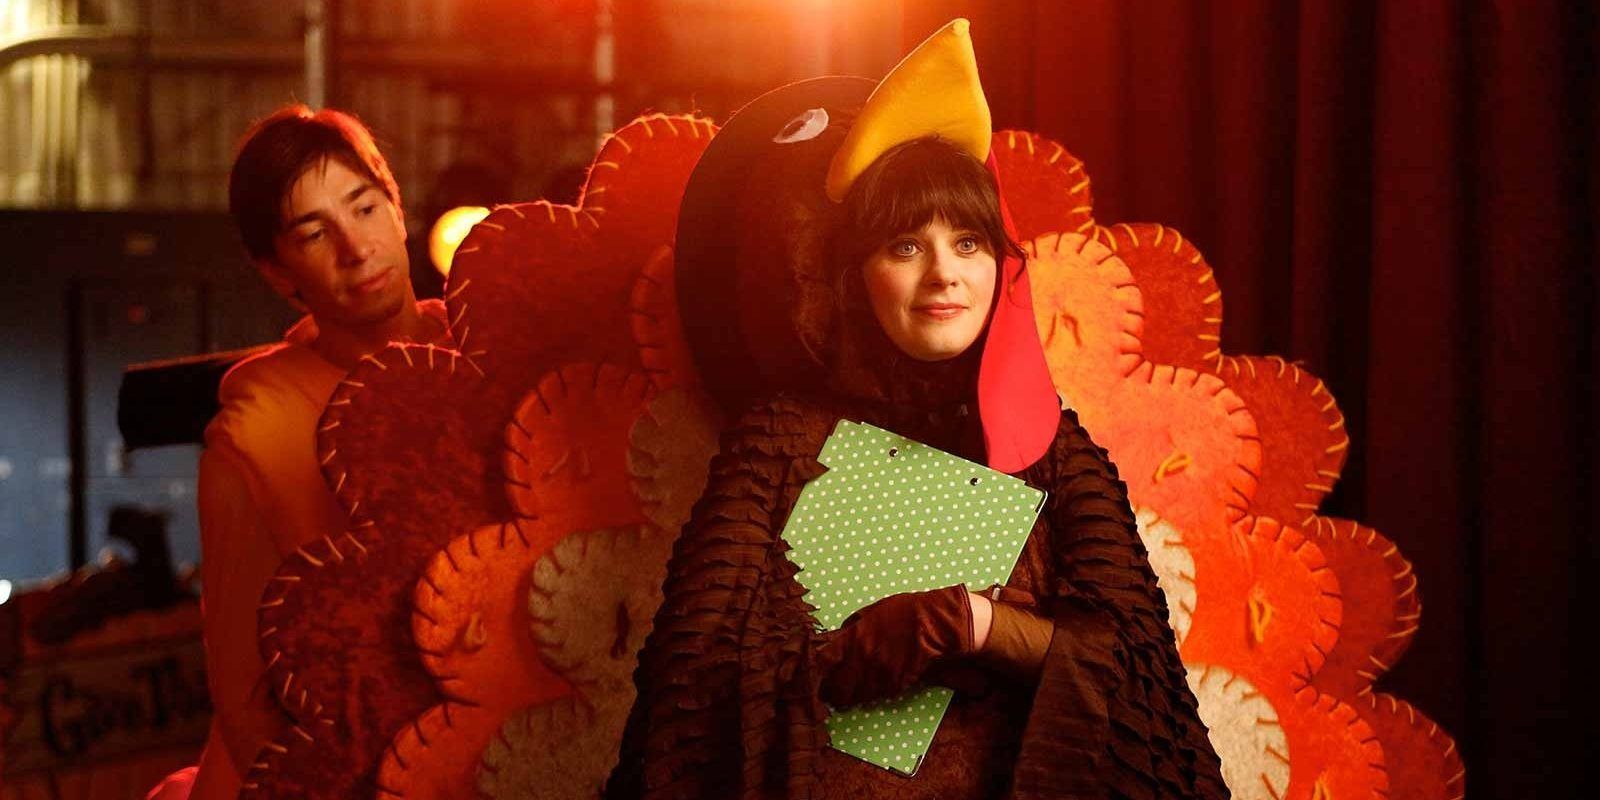 New Girl The Best Holiday Episodes Ranked (According To IMDb)